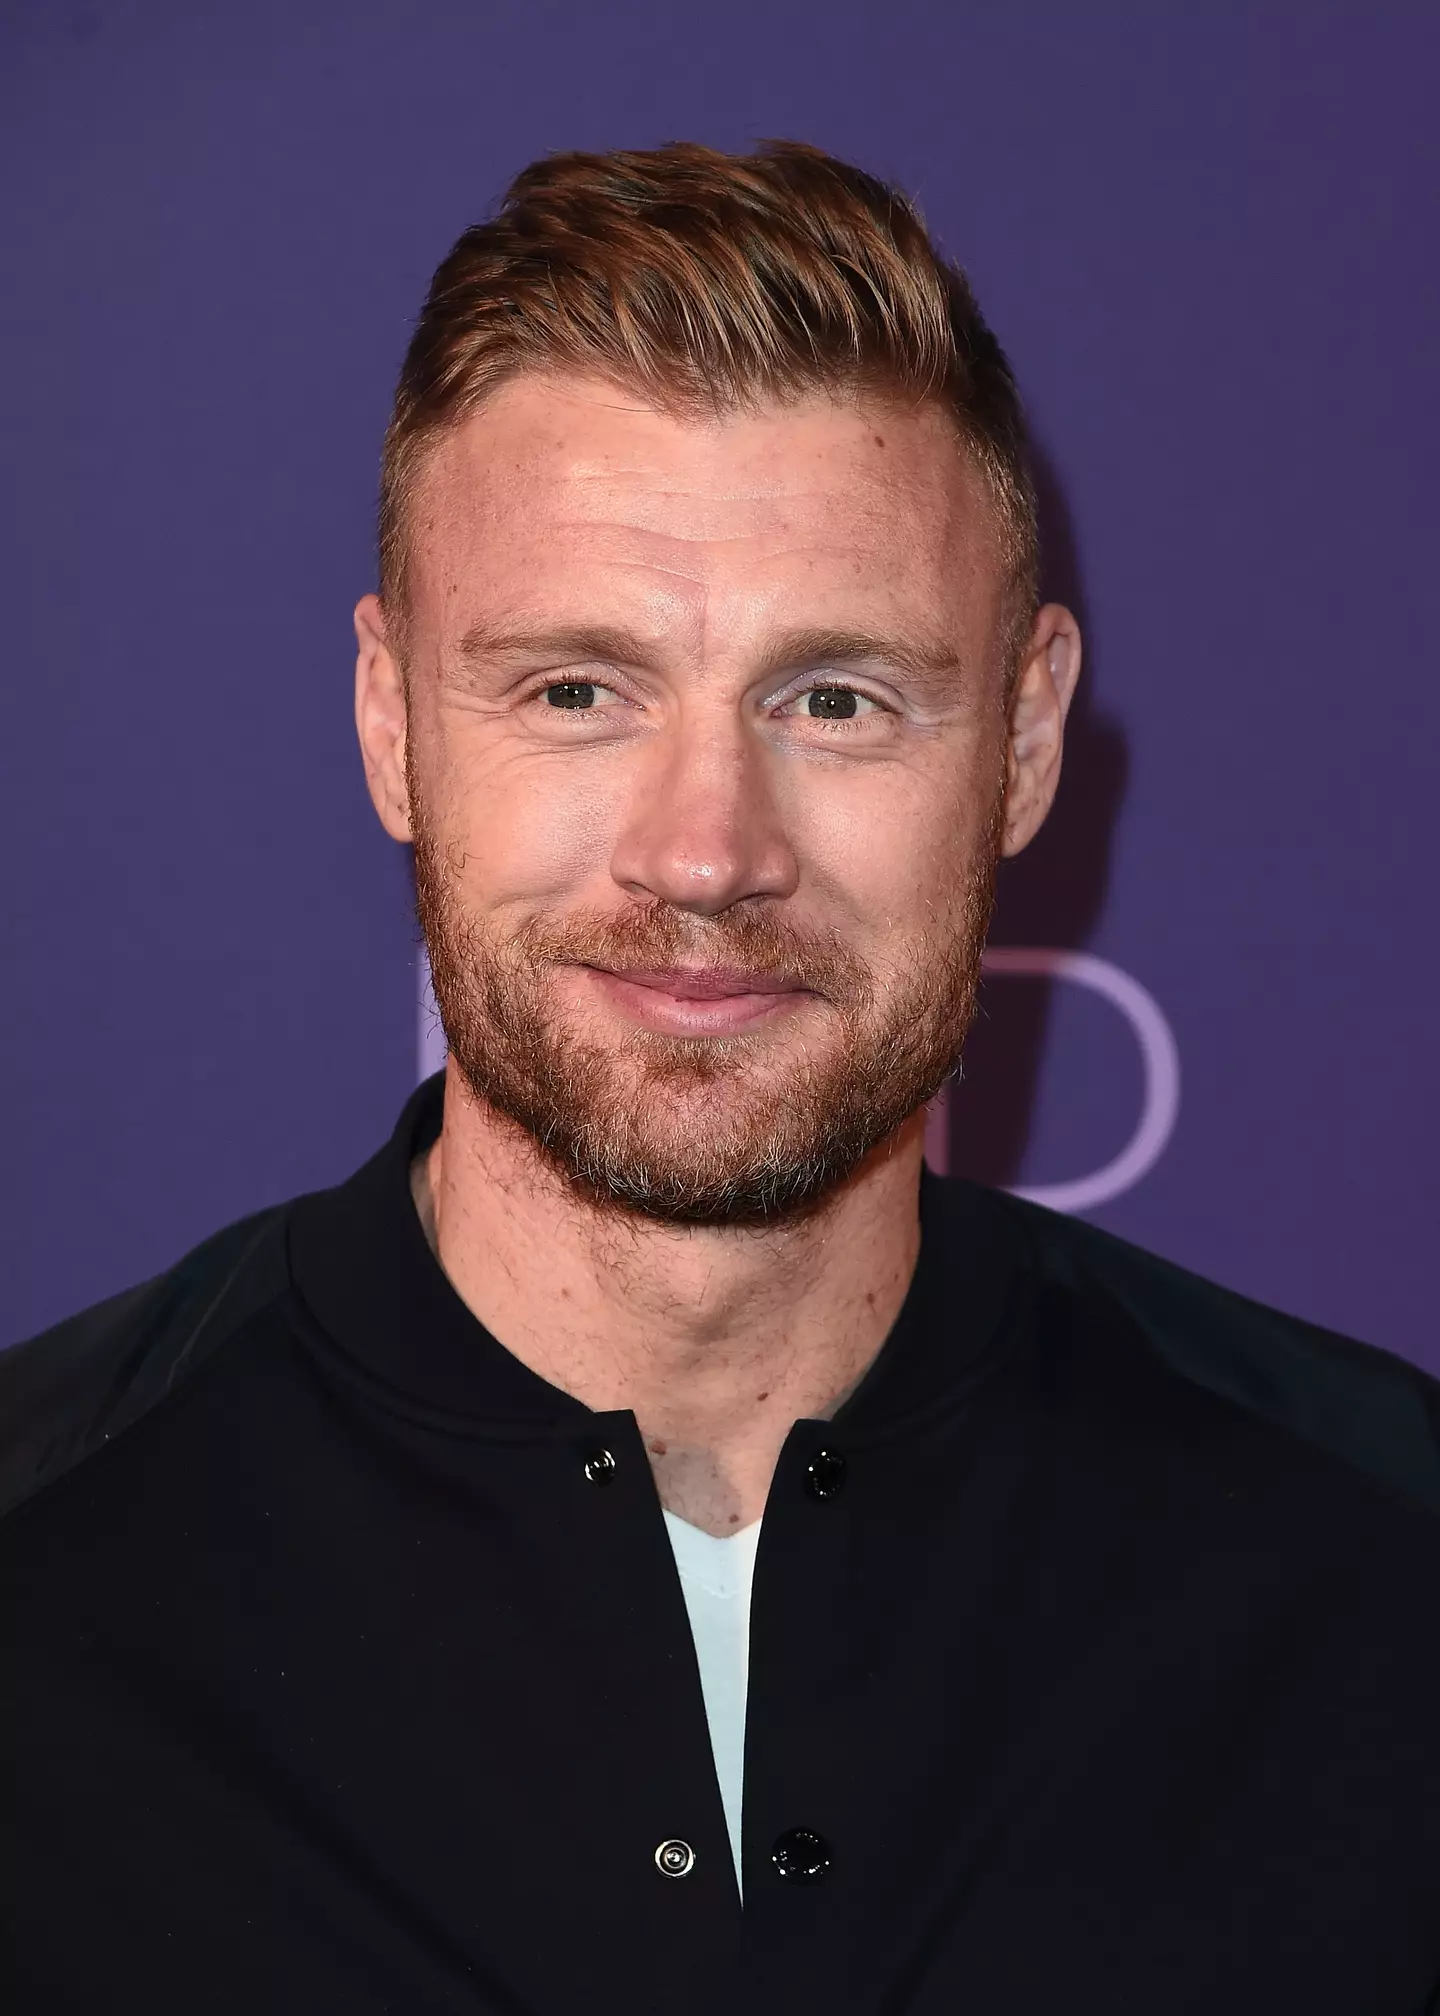 It will be Freddie Flintoff's first time being a head coach in cricket.